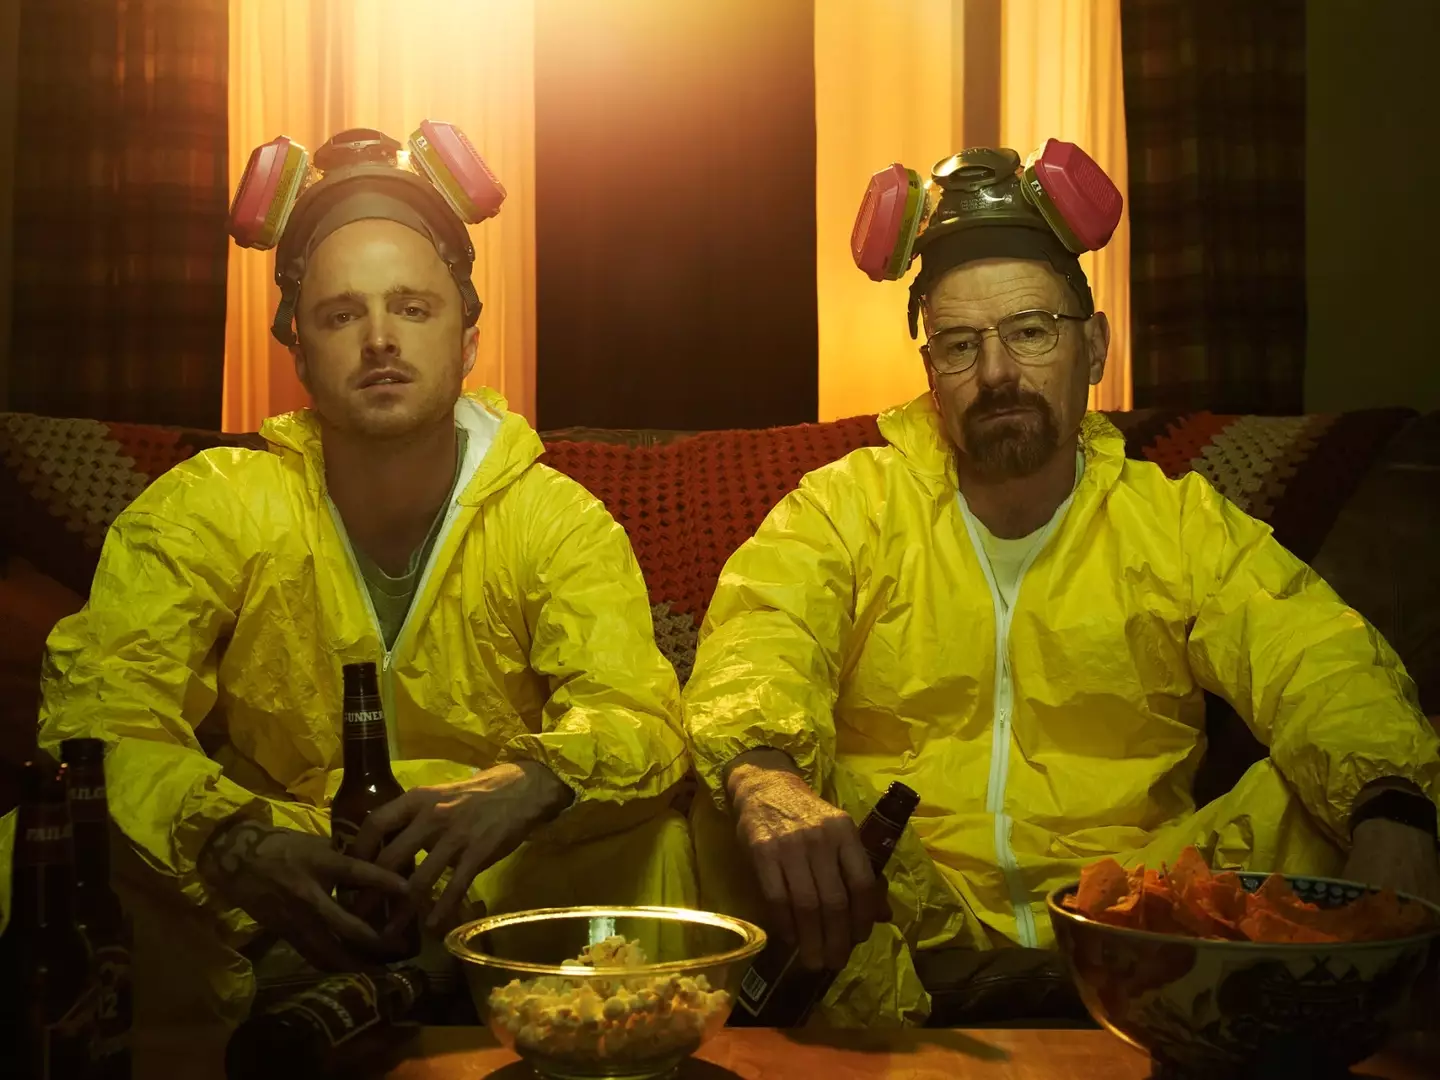 Breaking Bad characters Walter White and Jesse Pinkman.